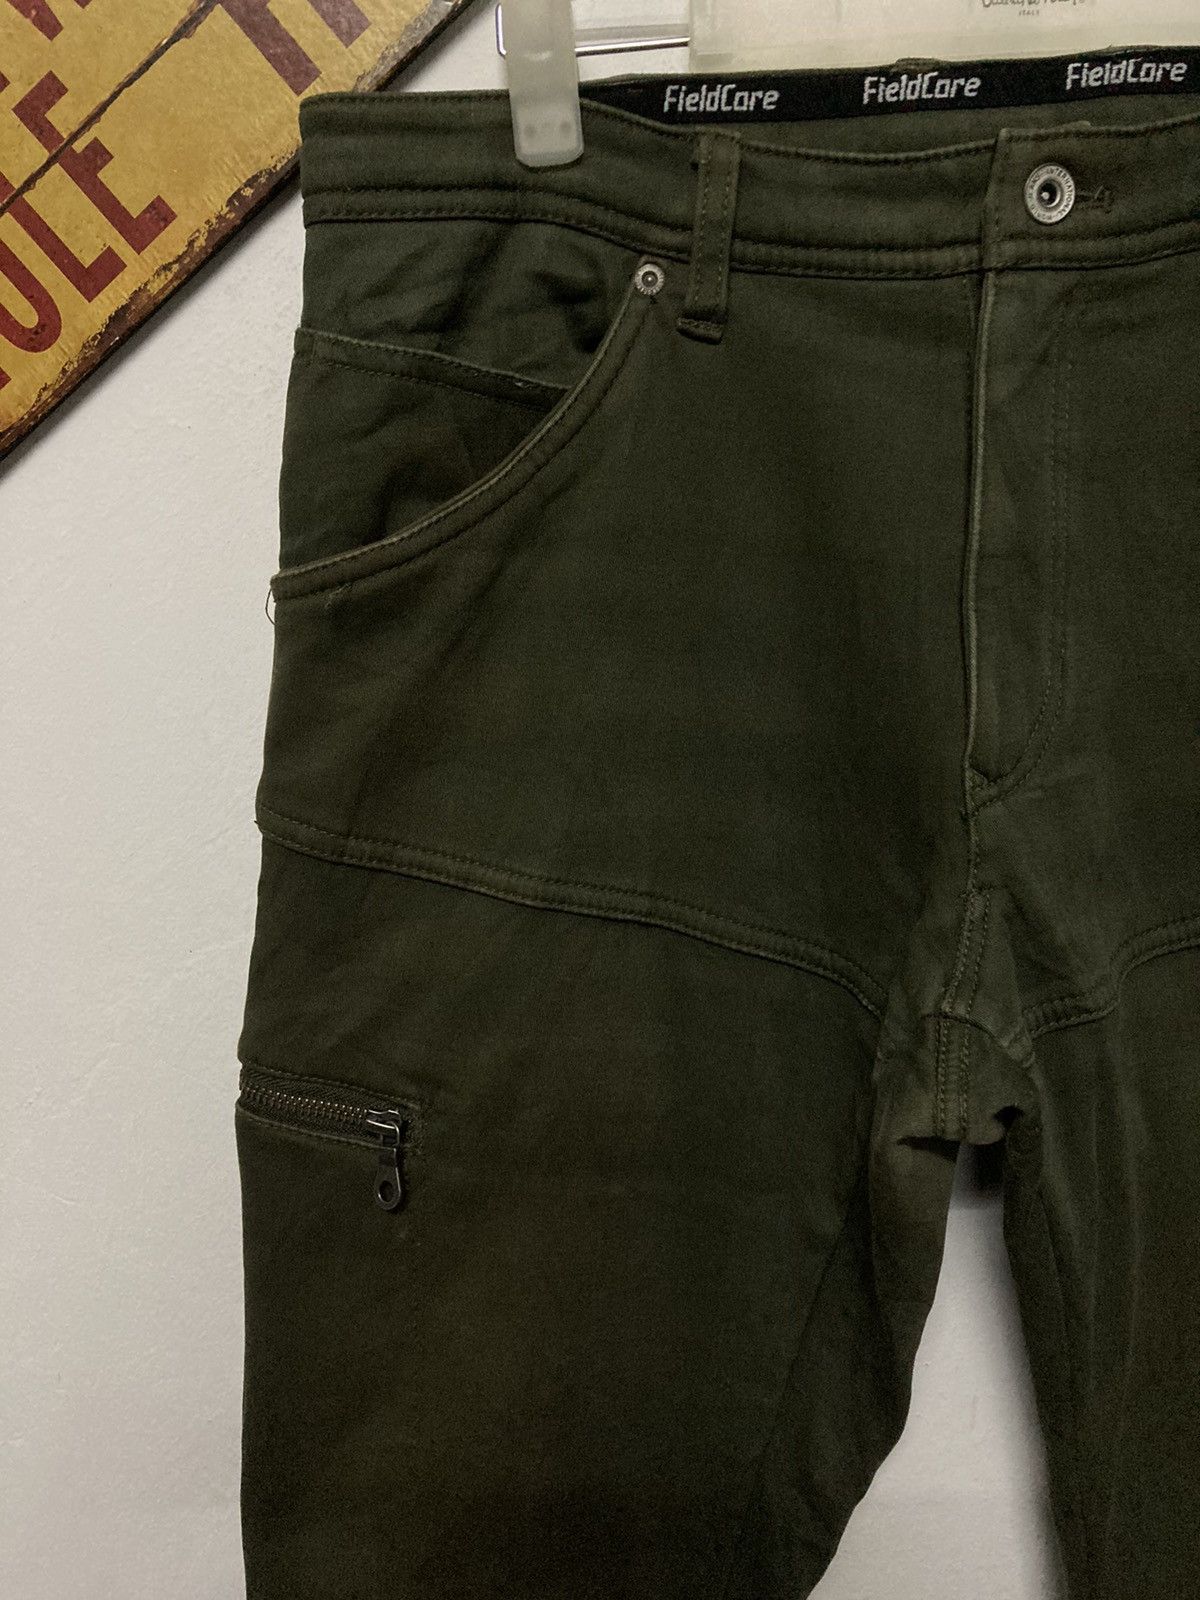 Vintage - Fieldcore Tactical Outdoor Thermal Pants - 8